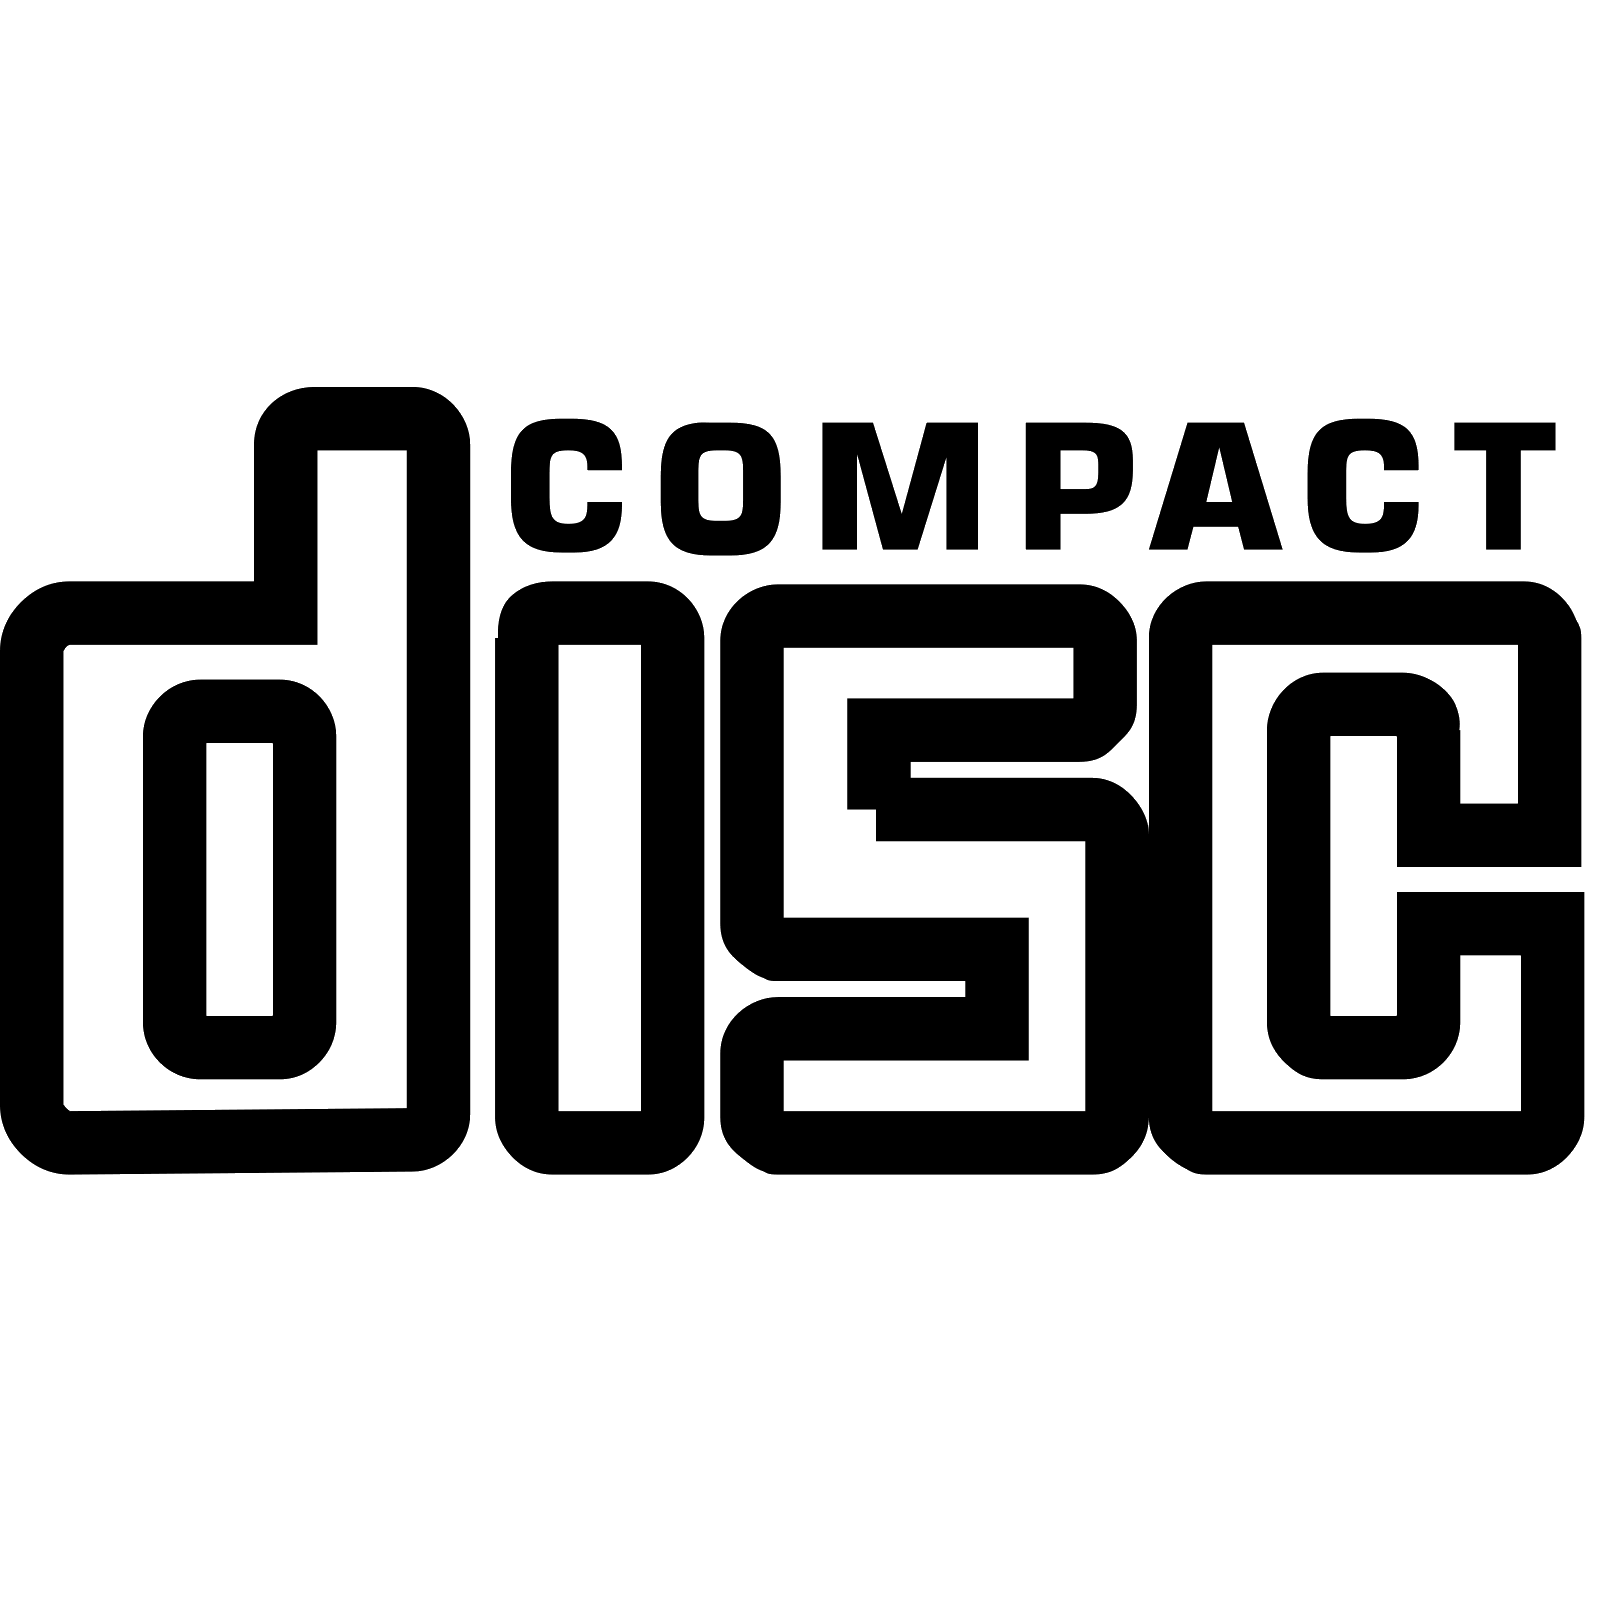 Compact Disc Logo - Compact disc logo png 5 PNG Image